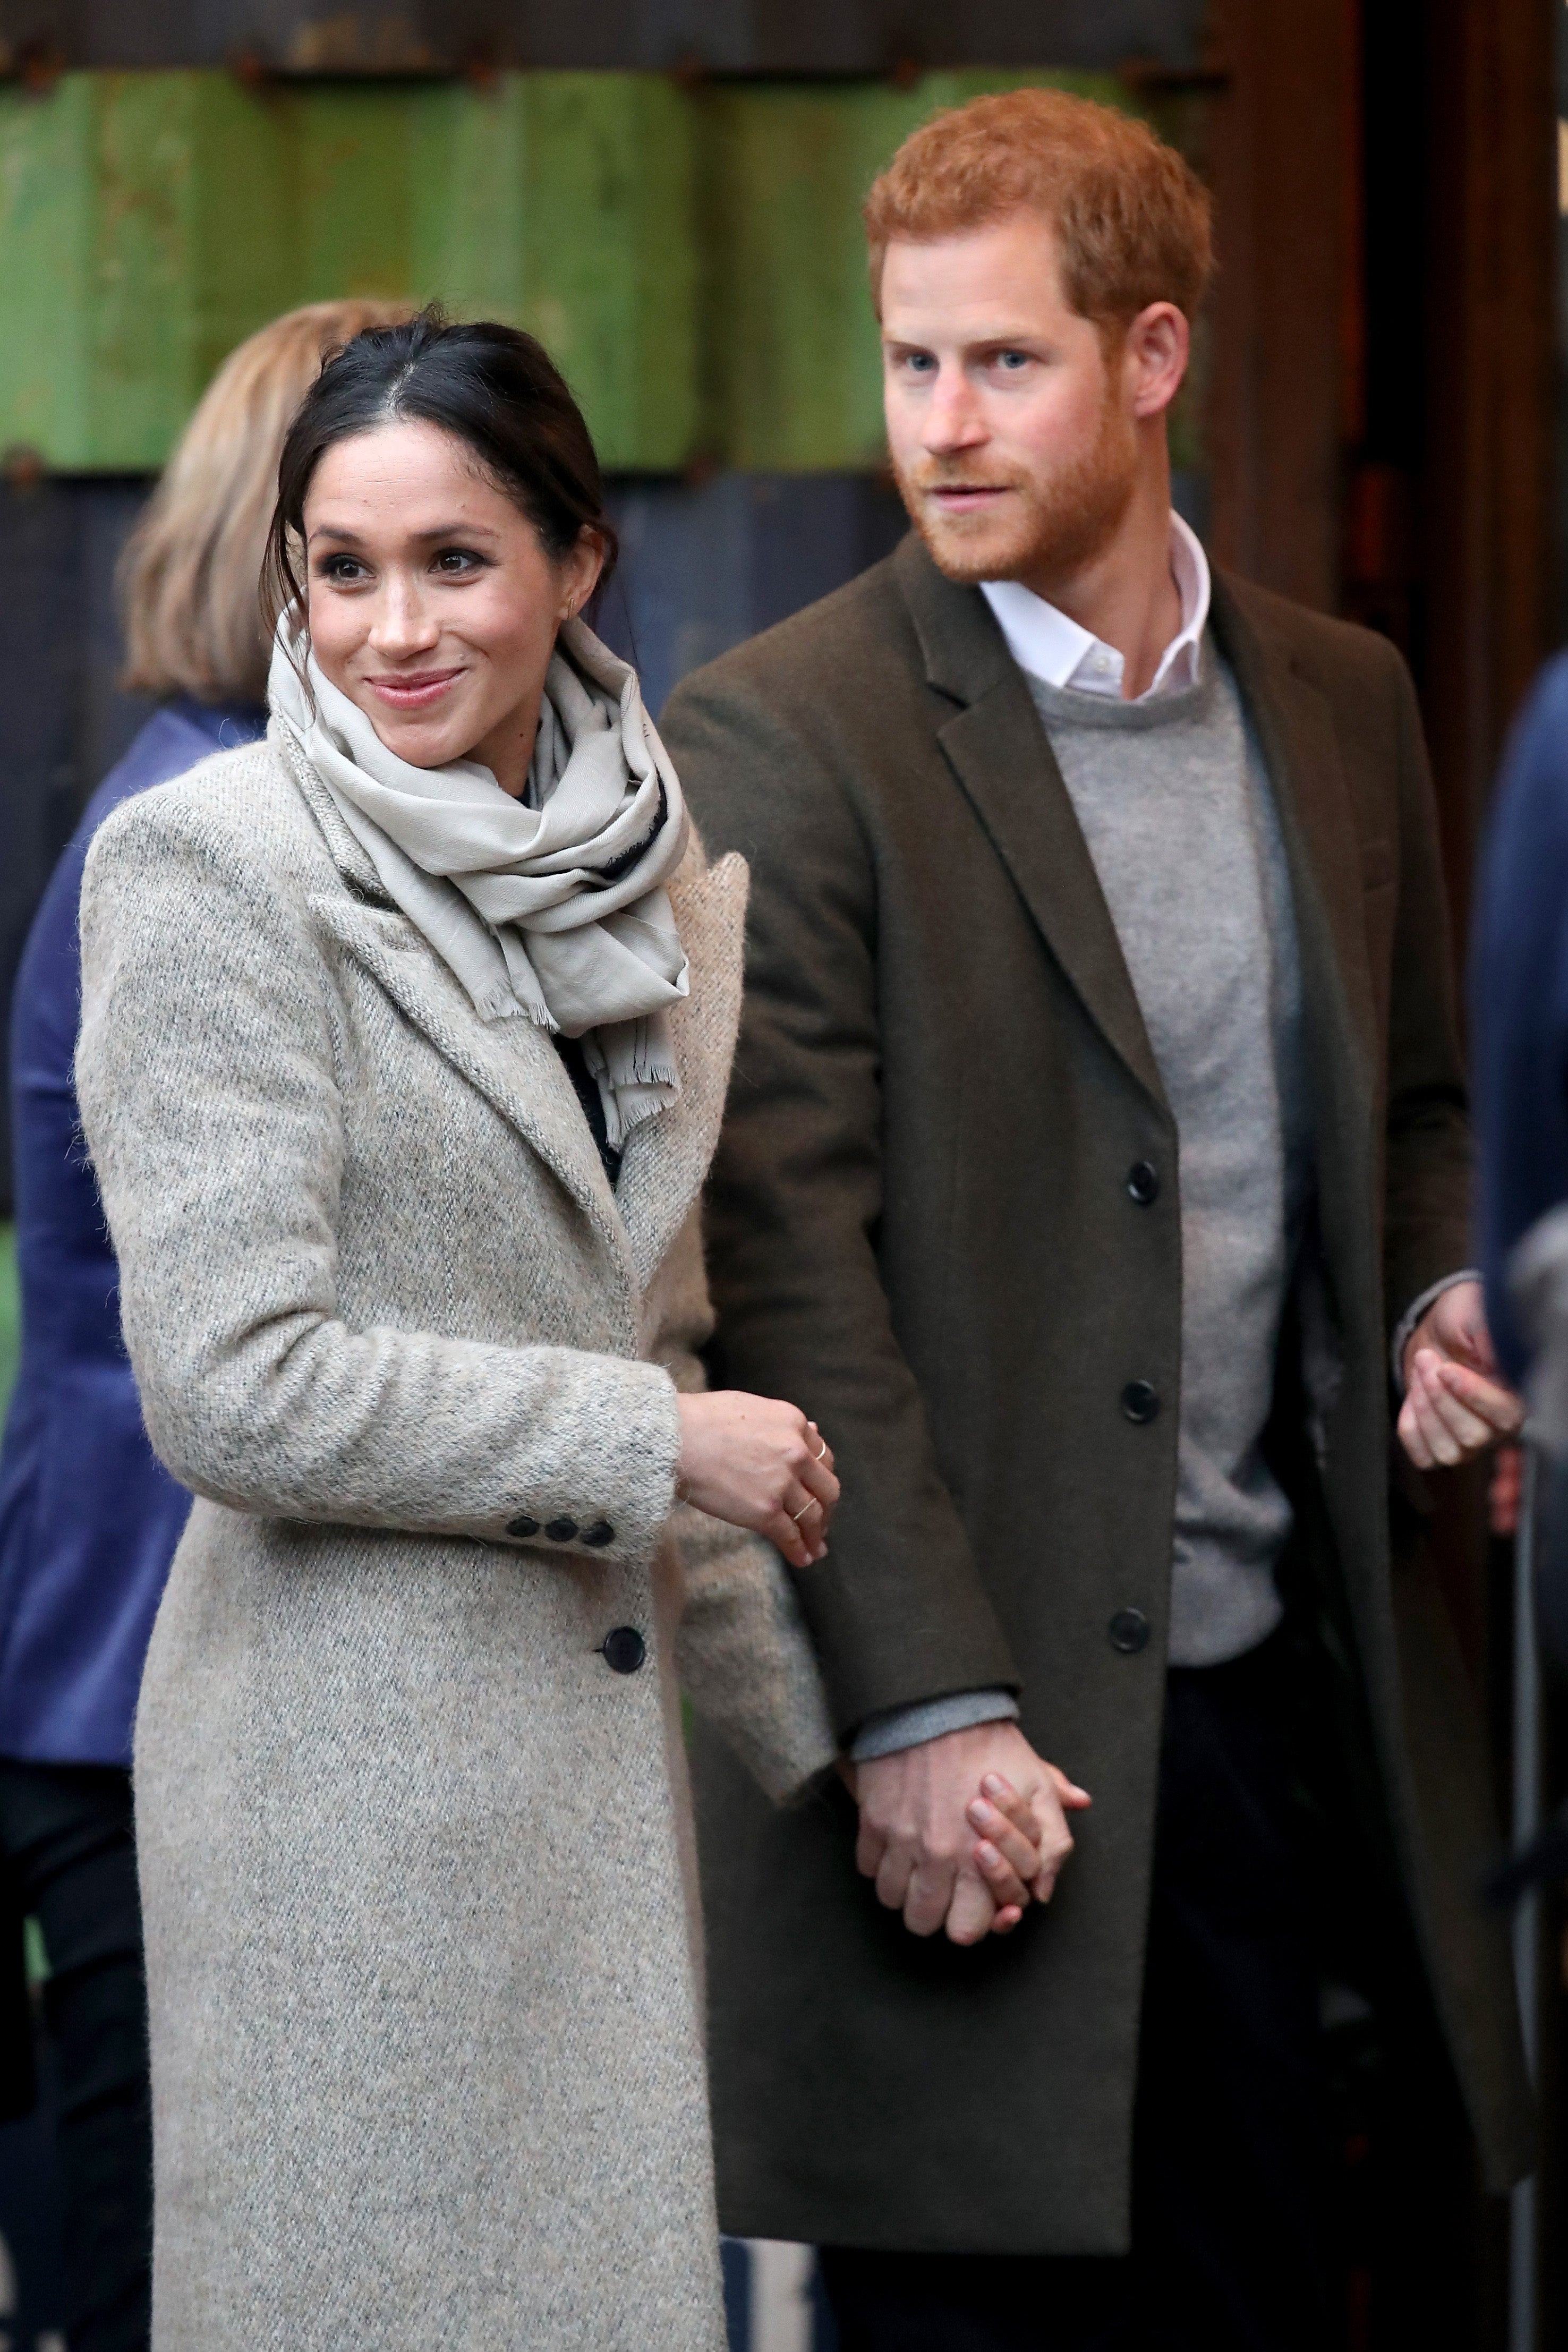 Meghan Markle and Prince Harry Make a Stunning Couple During Radio Station Visit ...